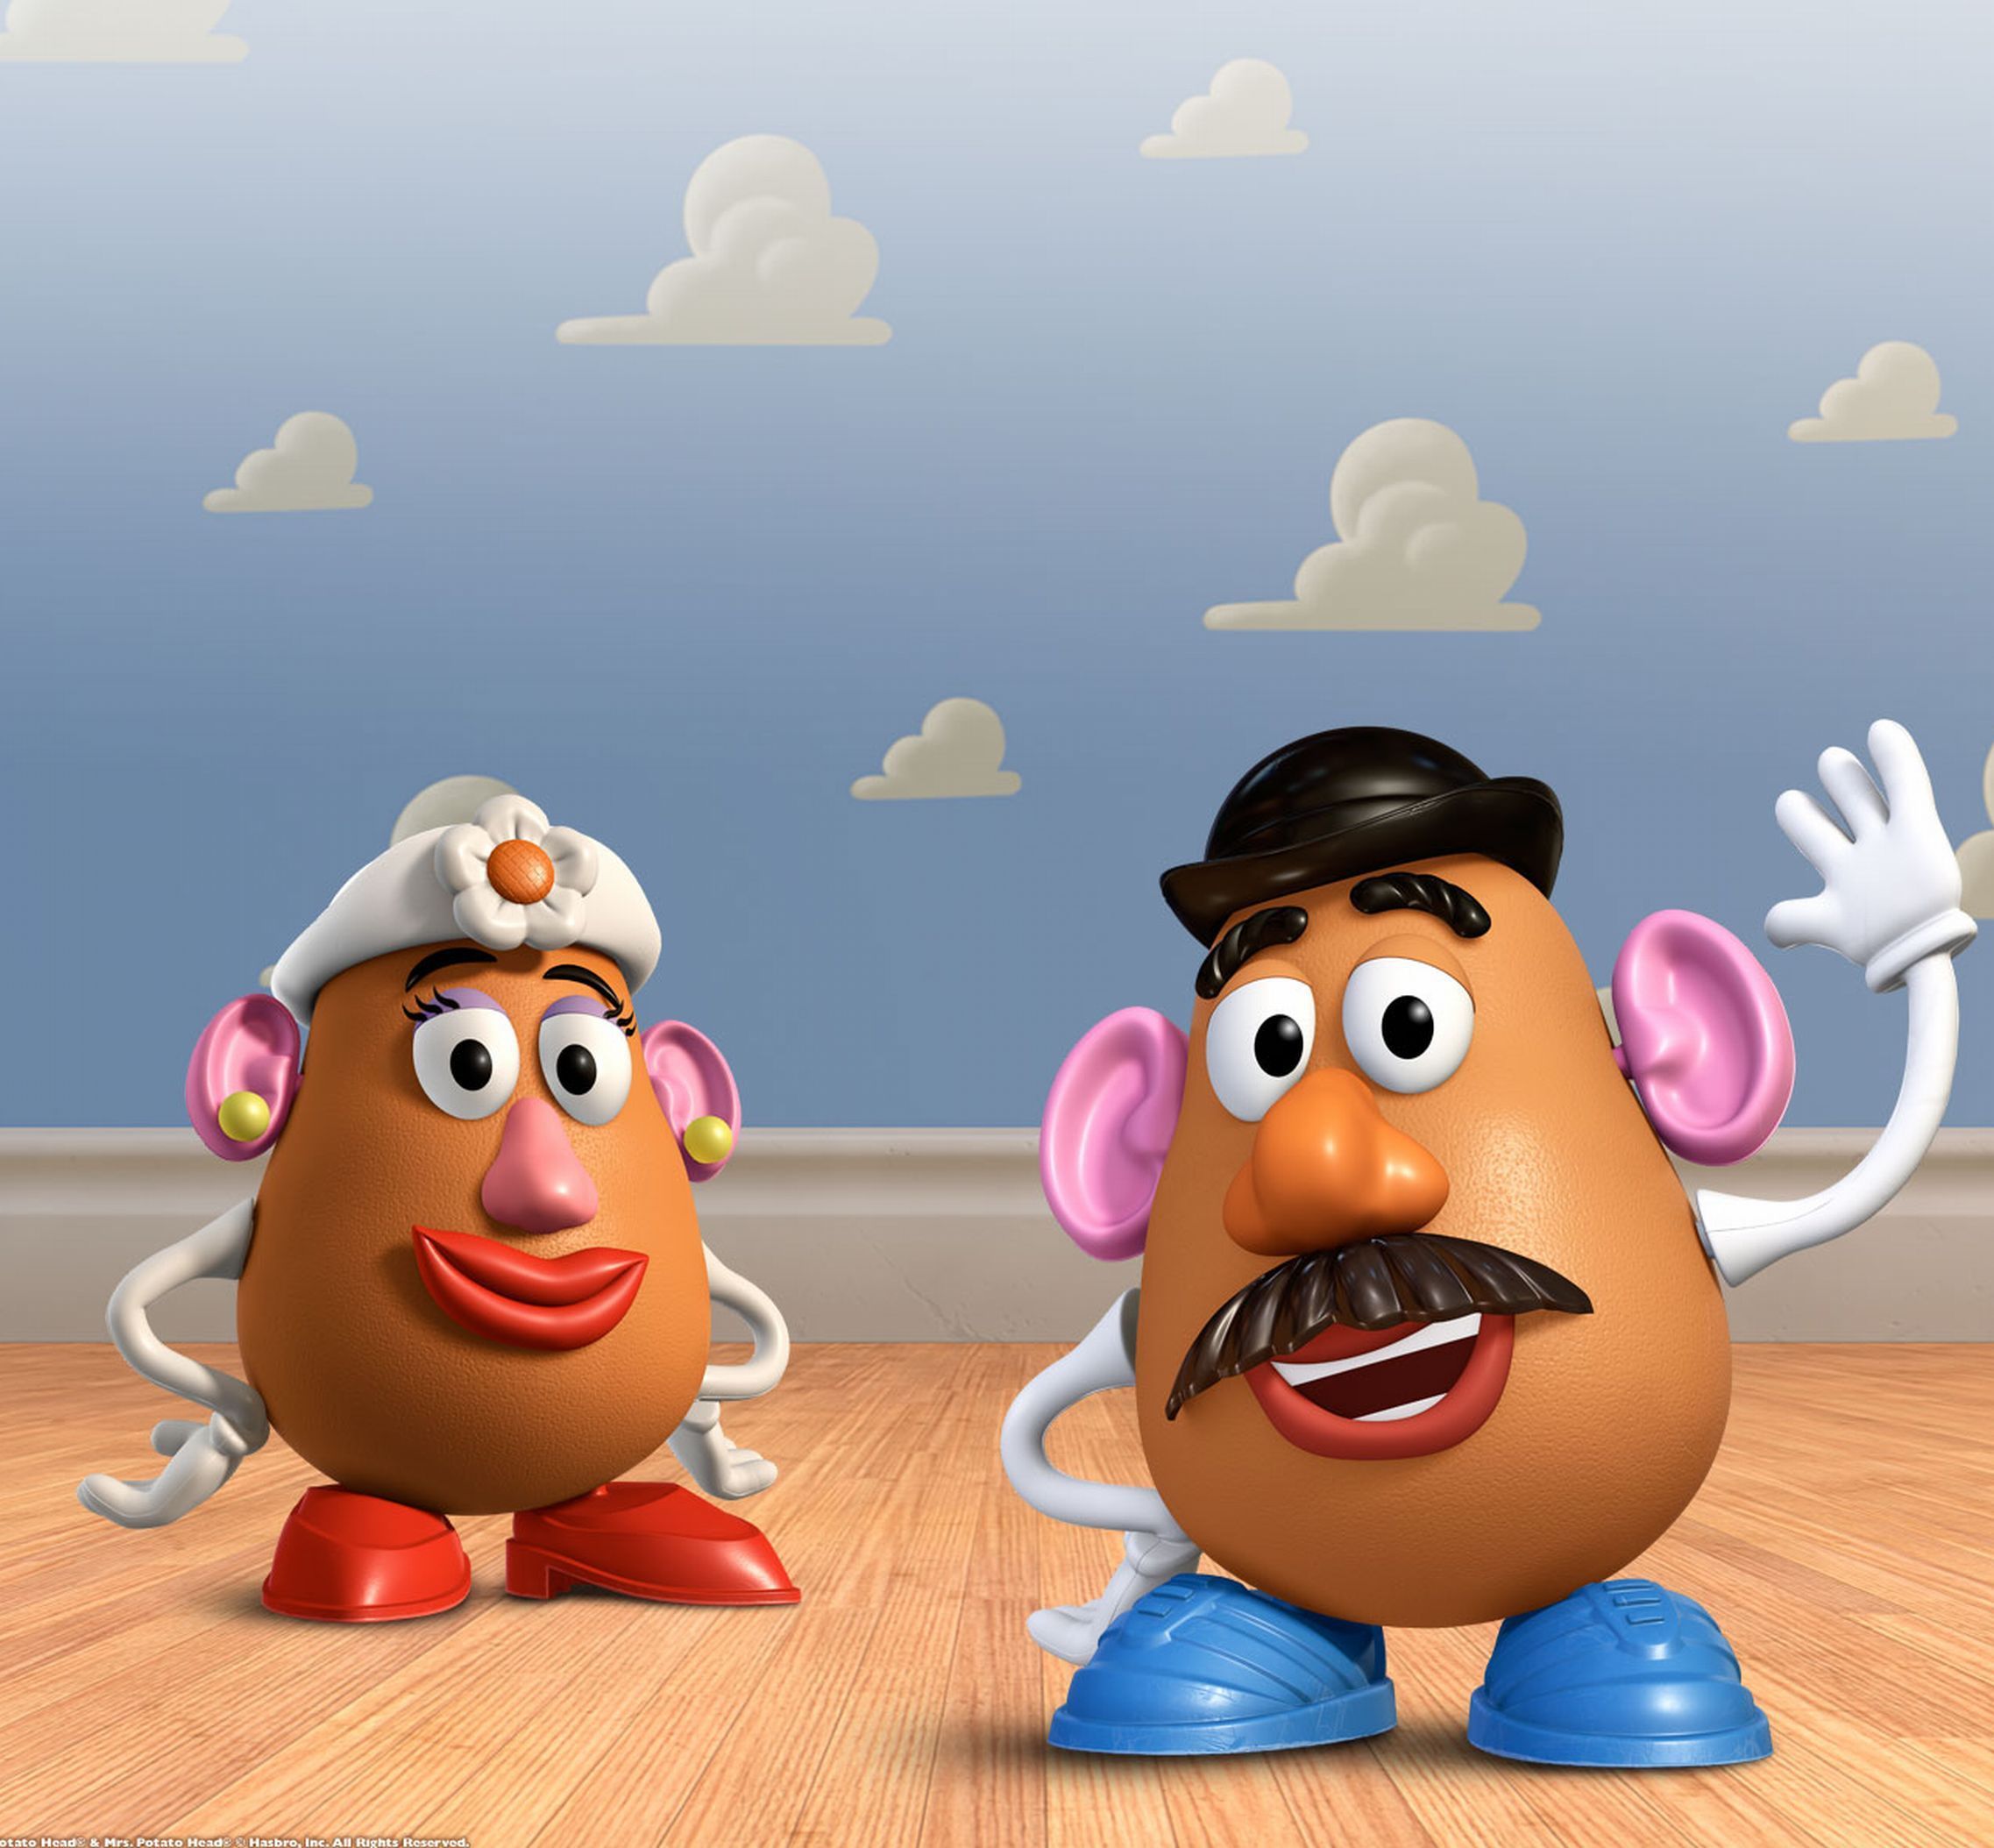 Toy Story. Potato Head (voiced By Don Rickles) Is An Outspoken And Sarcastic Potato Shaped Toy. His. Toy Story Crafts, Toy Story Potato, Toy Story Characters